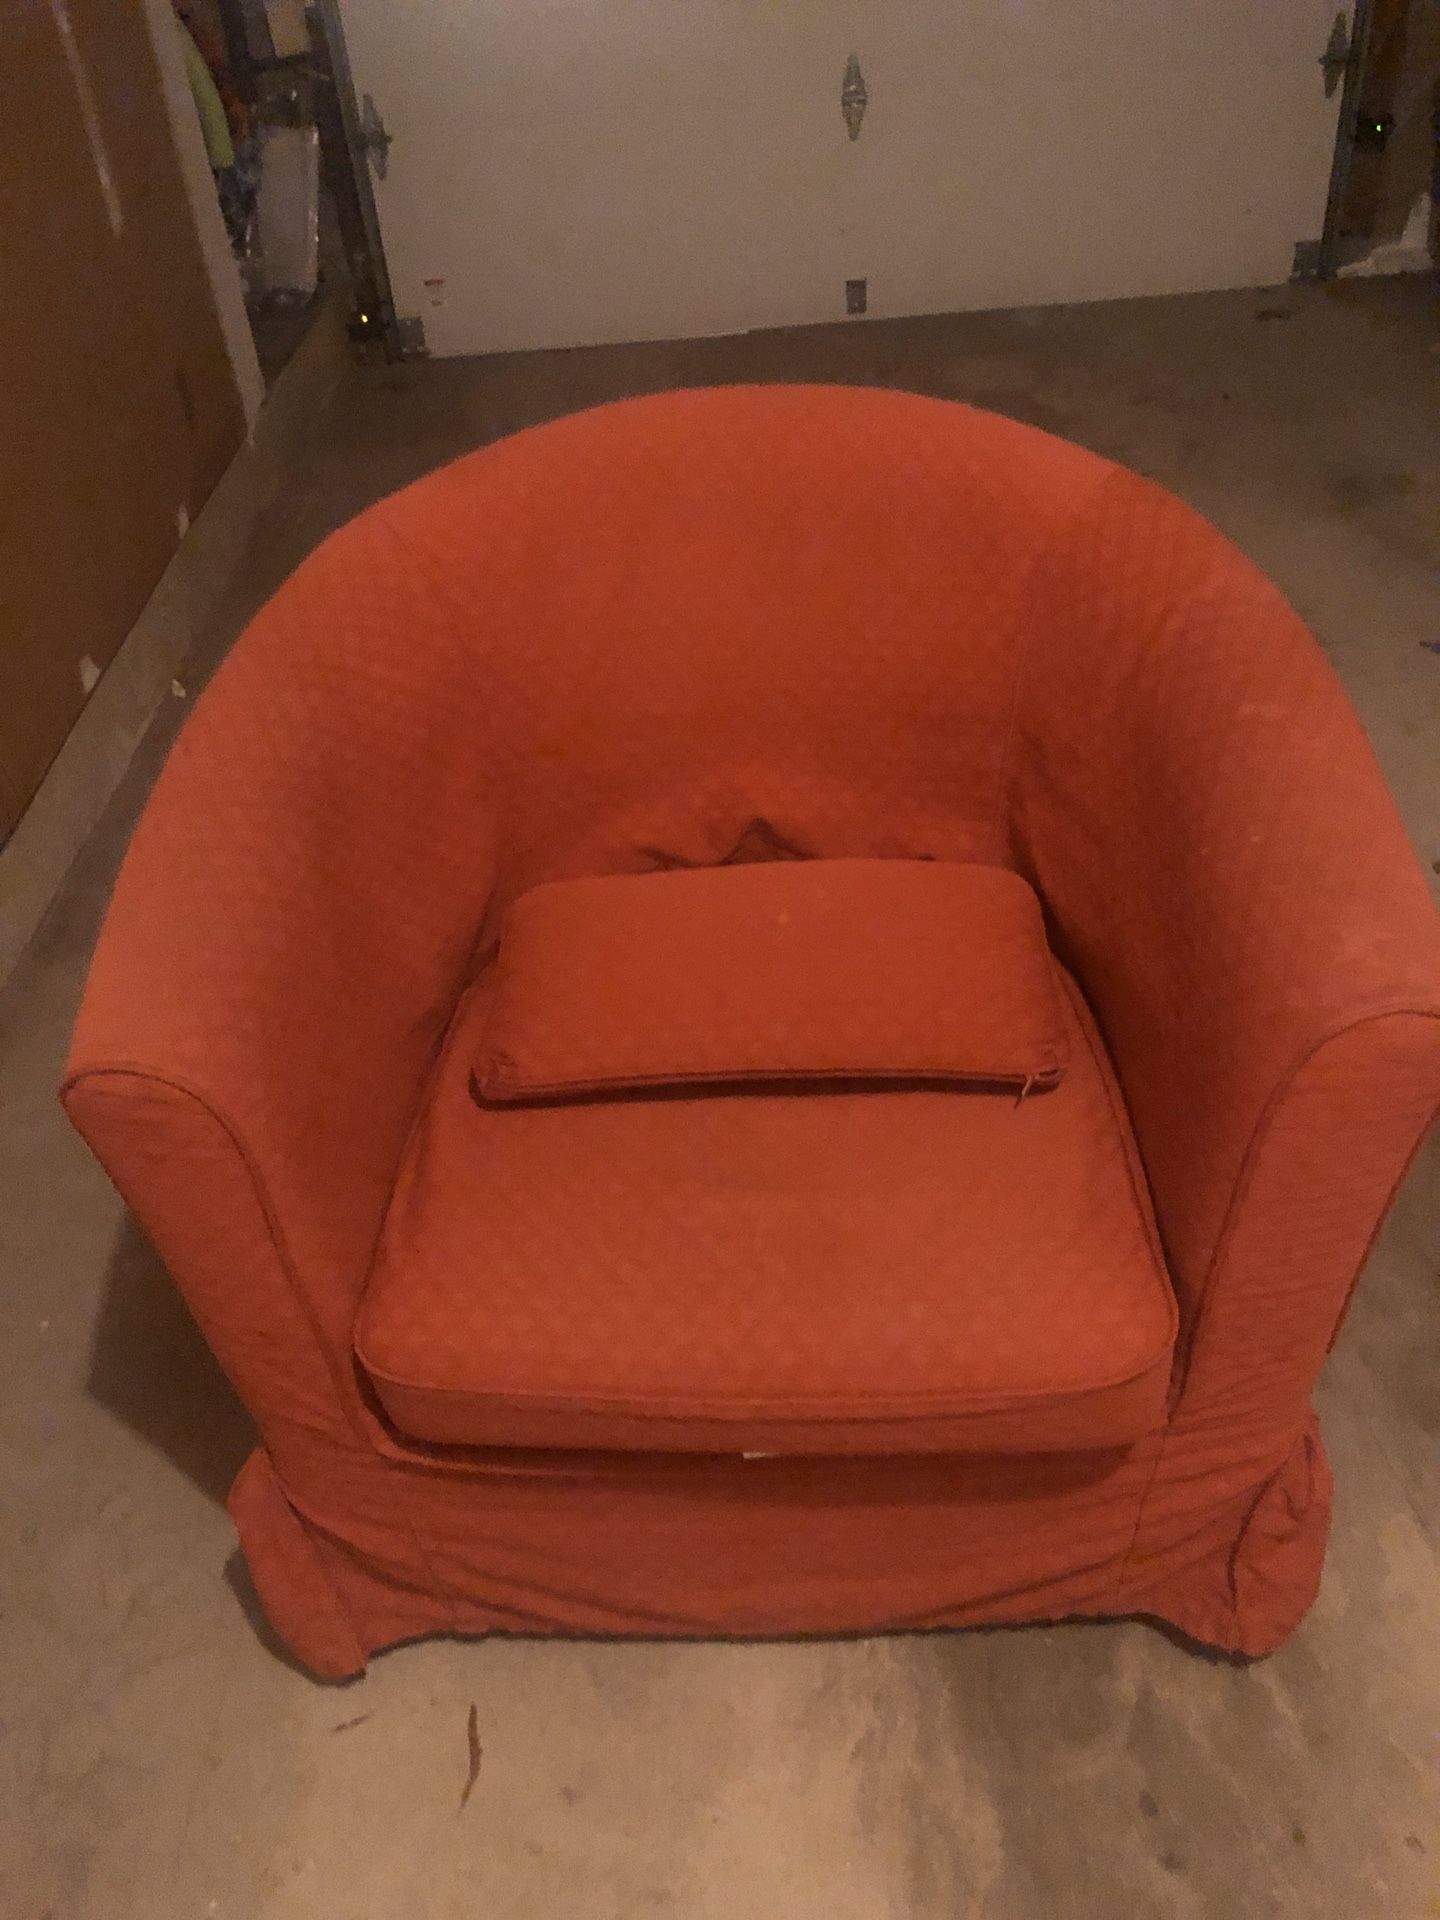 Ikea accent chair